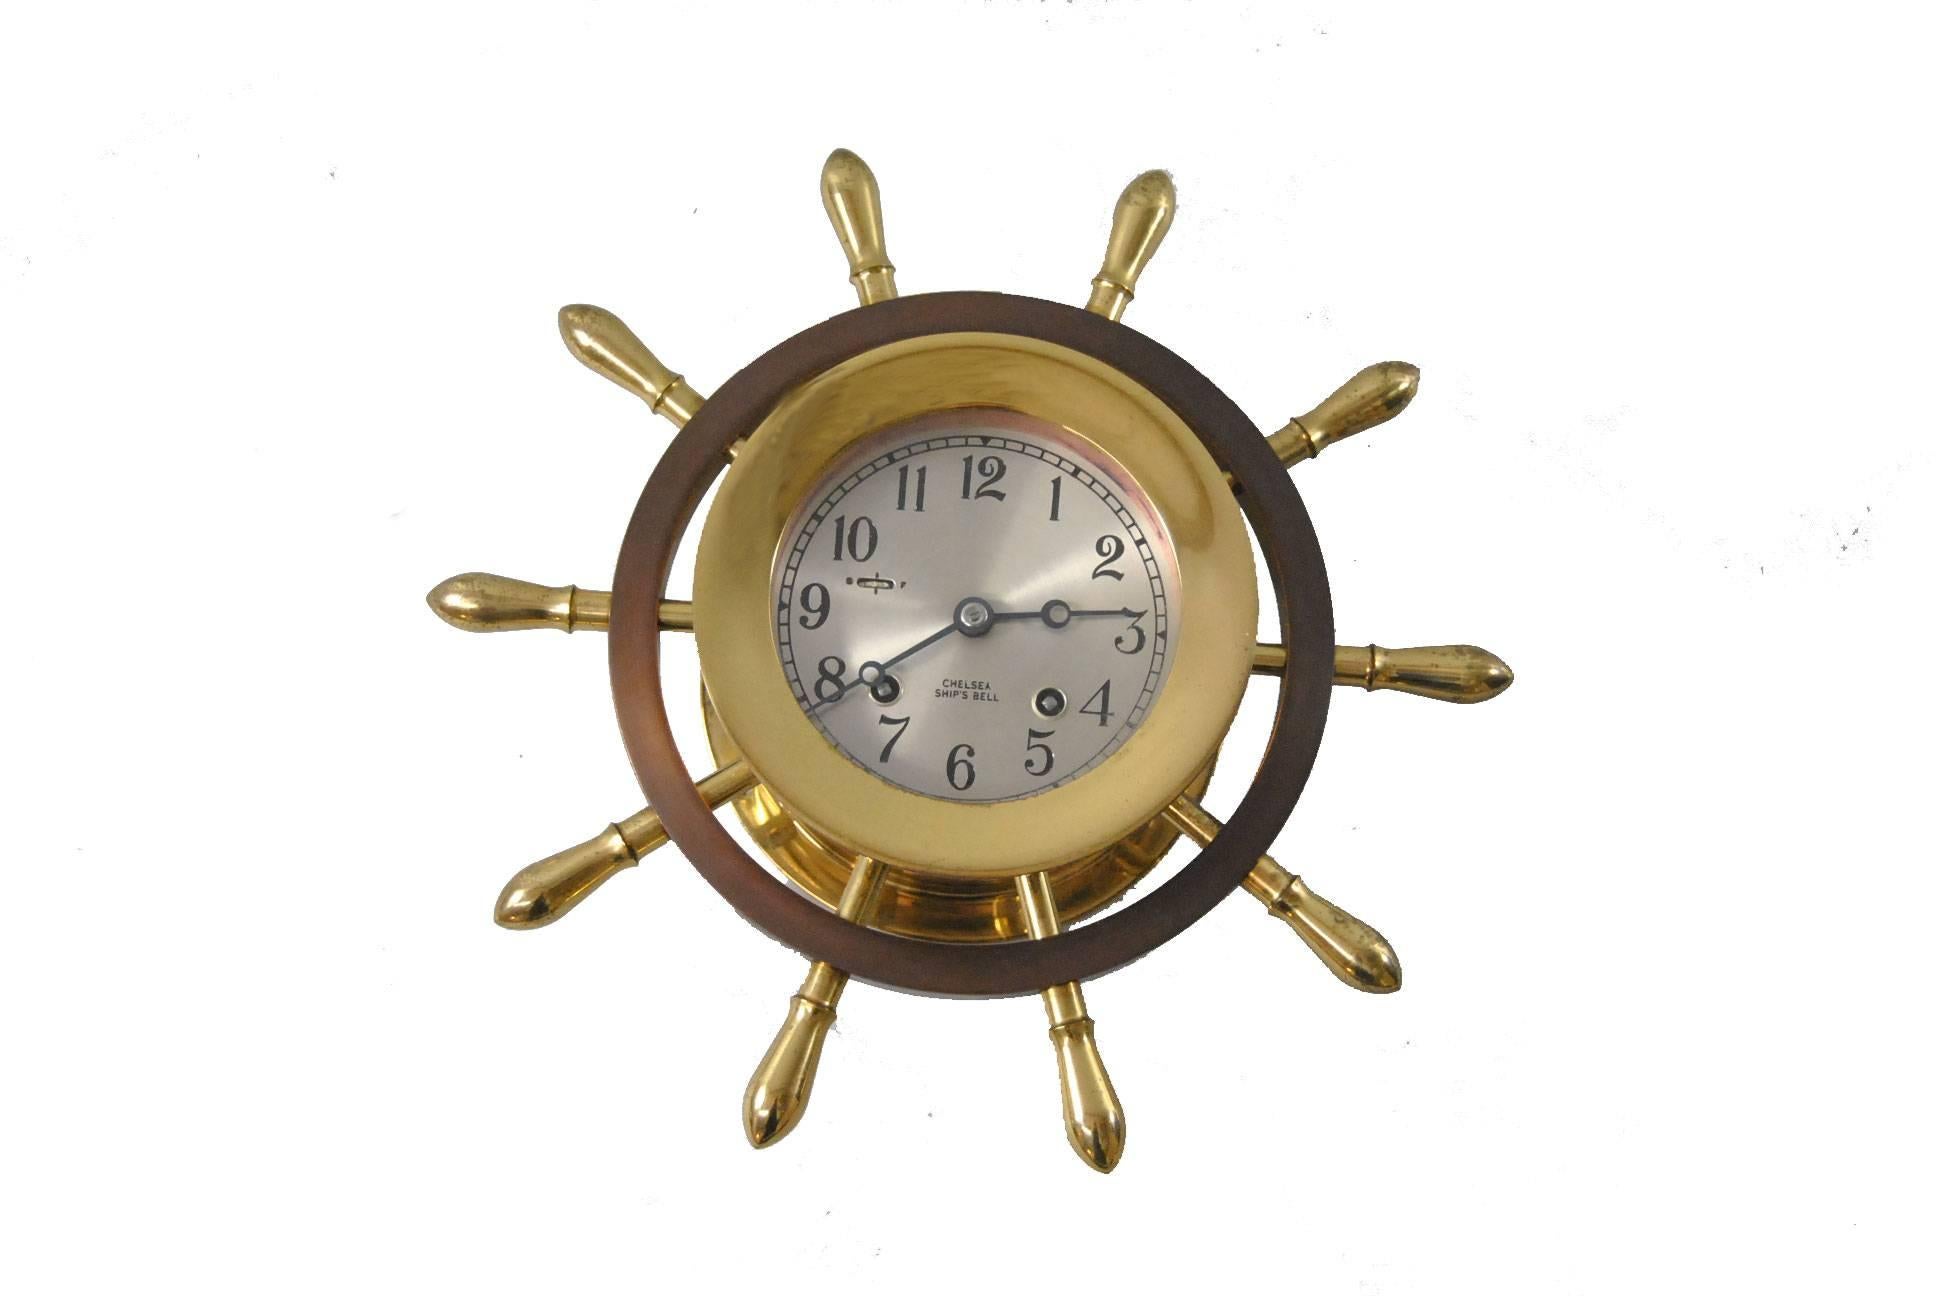 American Chelsea Ship's Bell Yacht Wheel, Pilot Model Clock with Stand